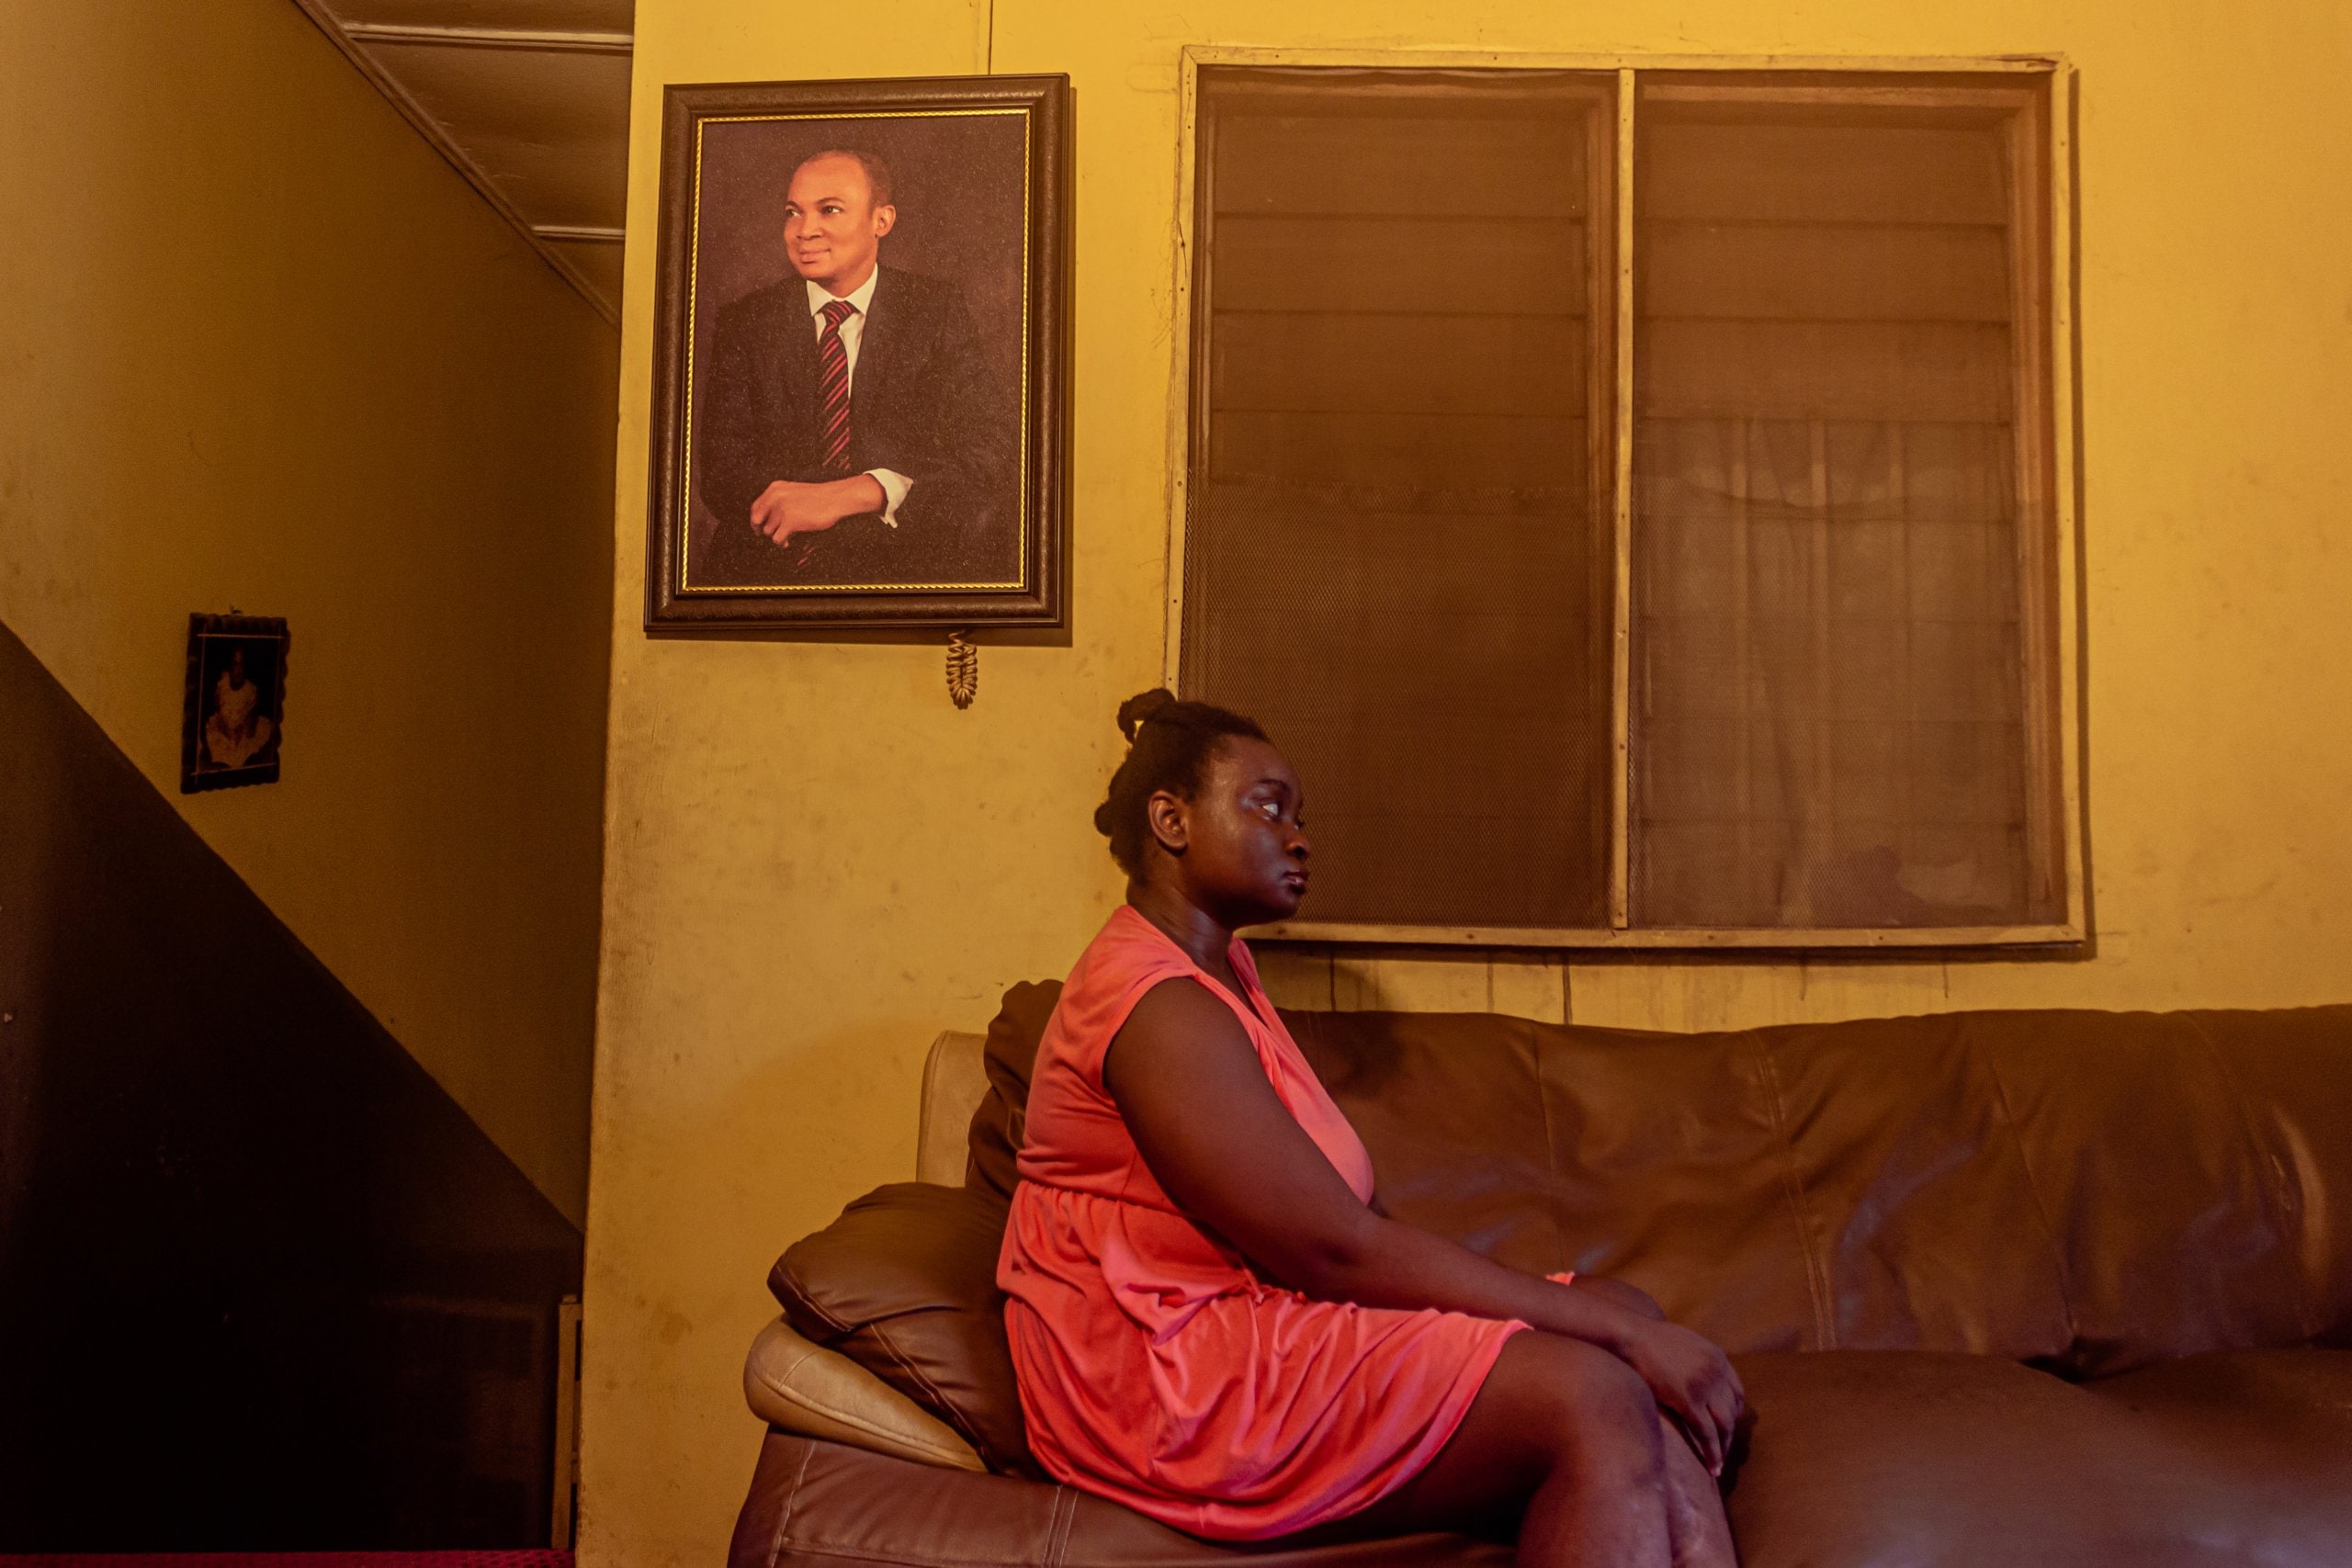 Ife sitting on a sofa in front of a window, a photo of a man in a suit on the wall behind her.